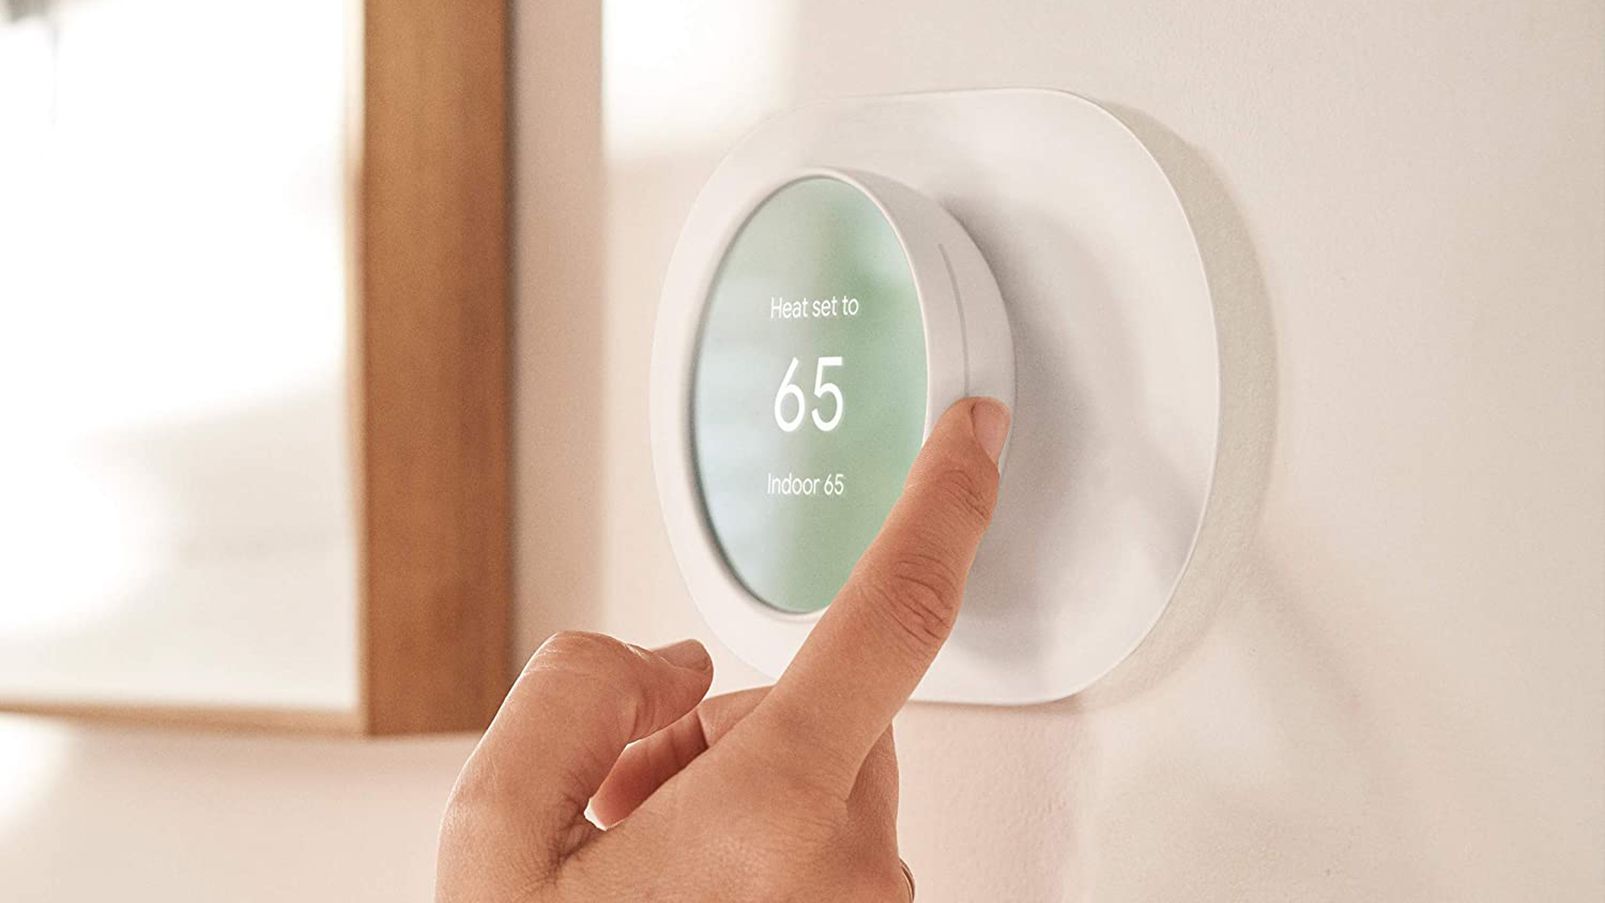 Google's Nest Thermostat drops to $90 in an early Black Friday deal